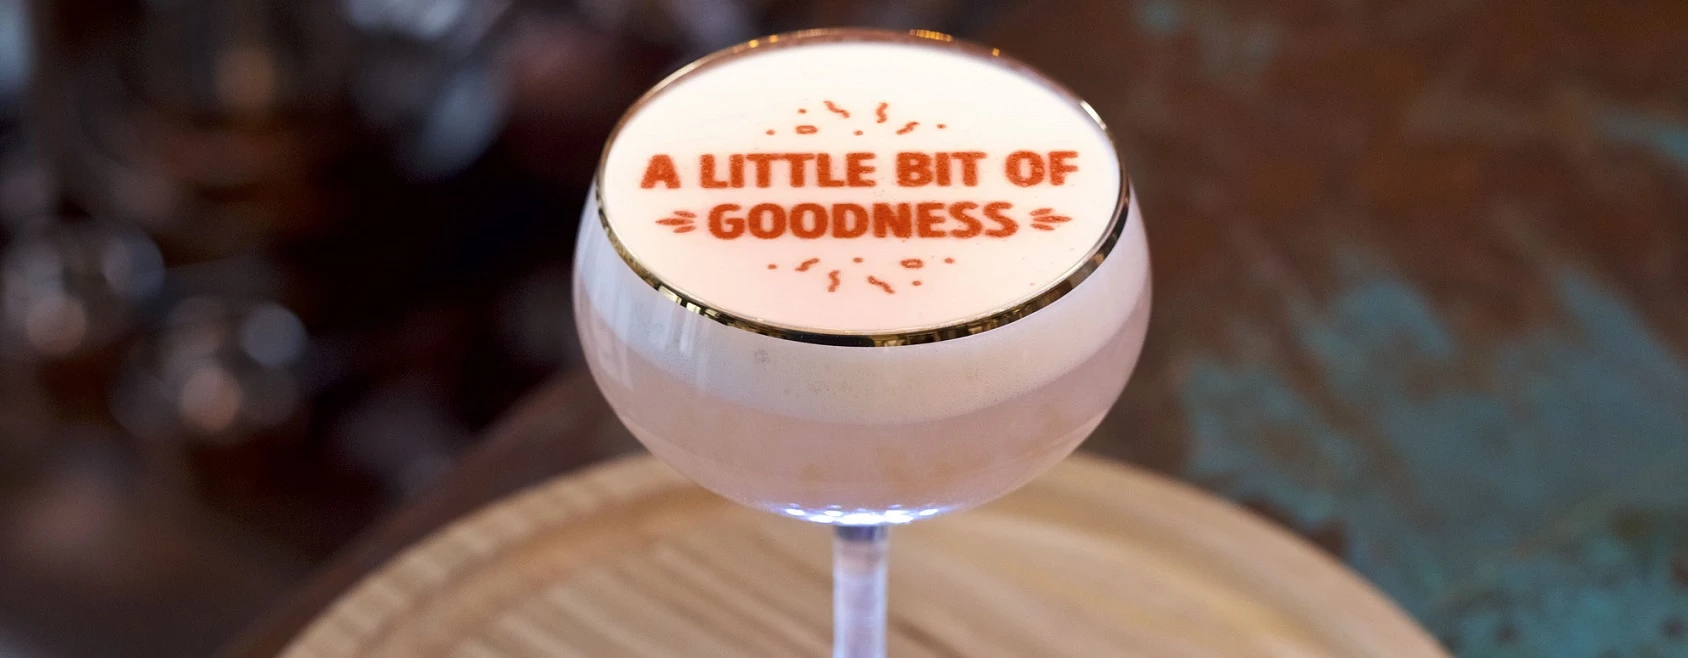 ripples cocktail: a little bit of goodness